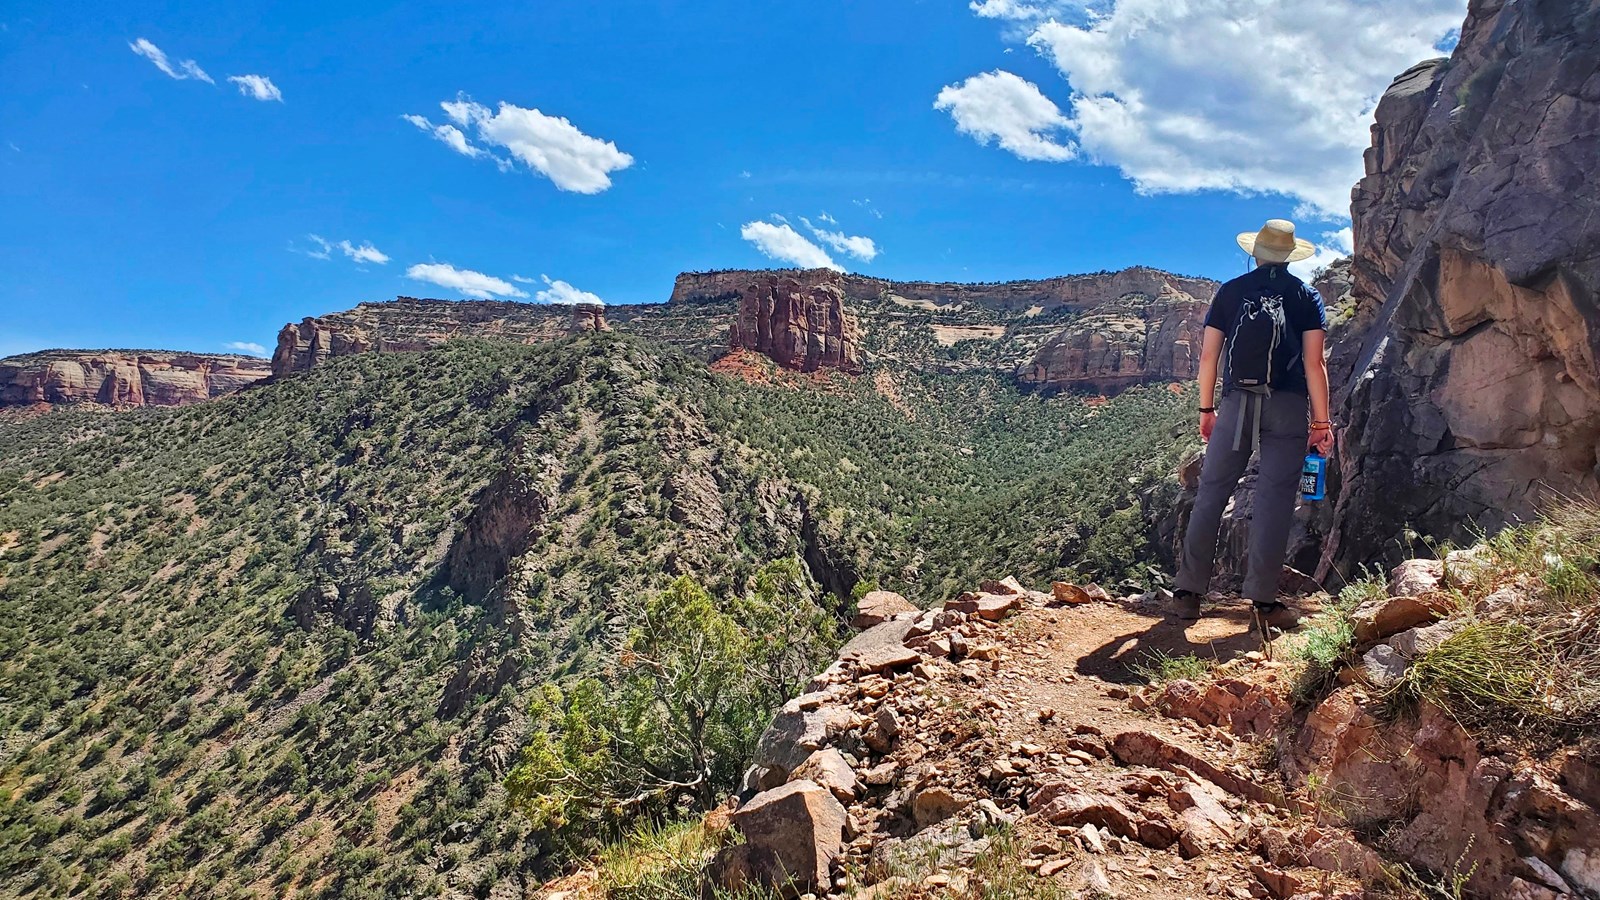 hiker in wide-brimmed hat looks over scenic forested canyons of gray rock